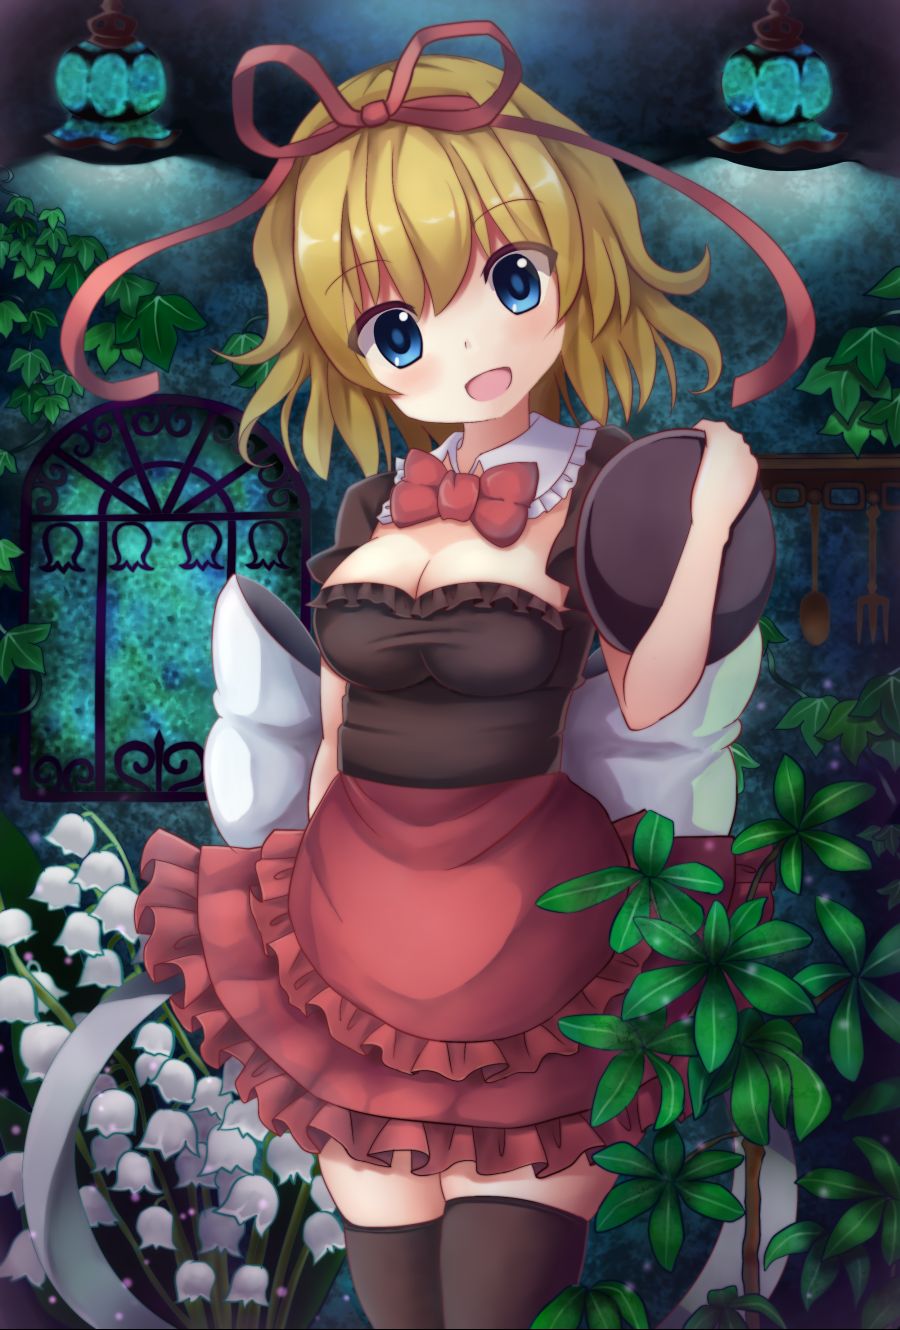 __medicine_melancholy_touhou_drawn_by_suigetsu_watermoon_910__11bd1b0d4f73abcaacc82172c521a5dc.png